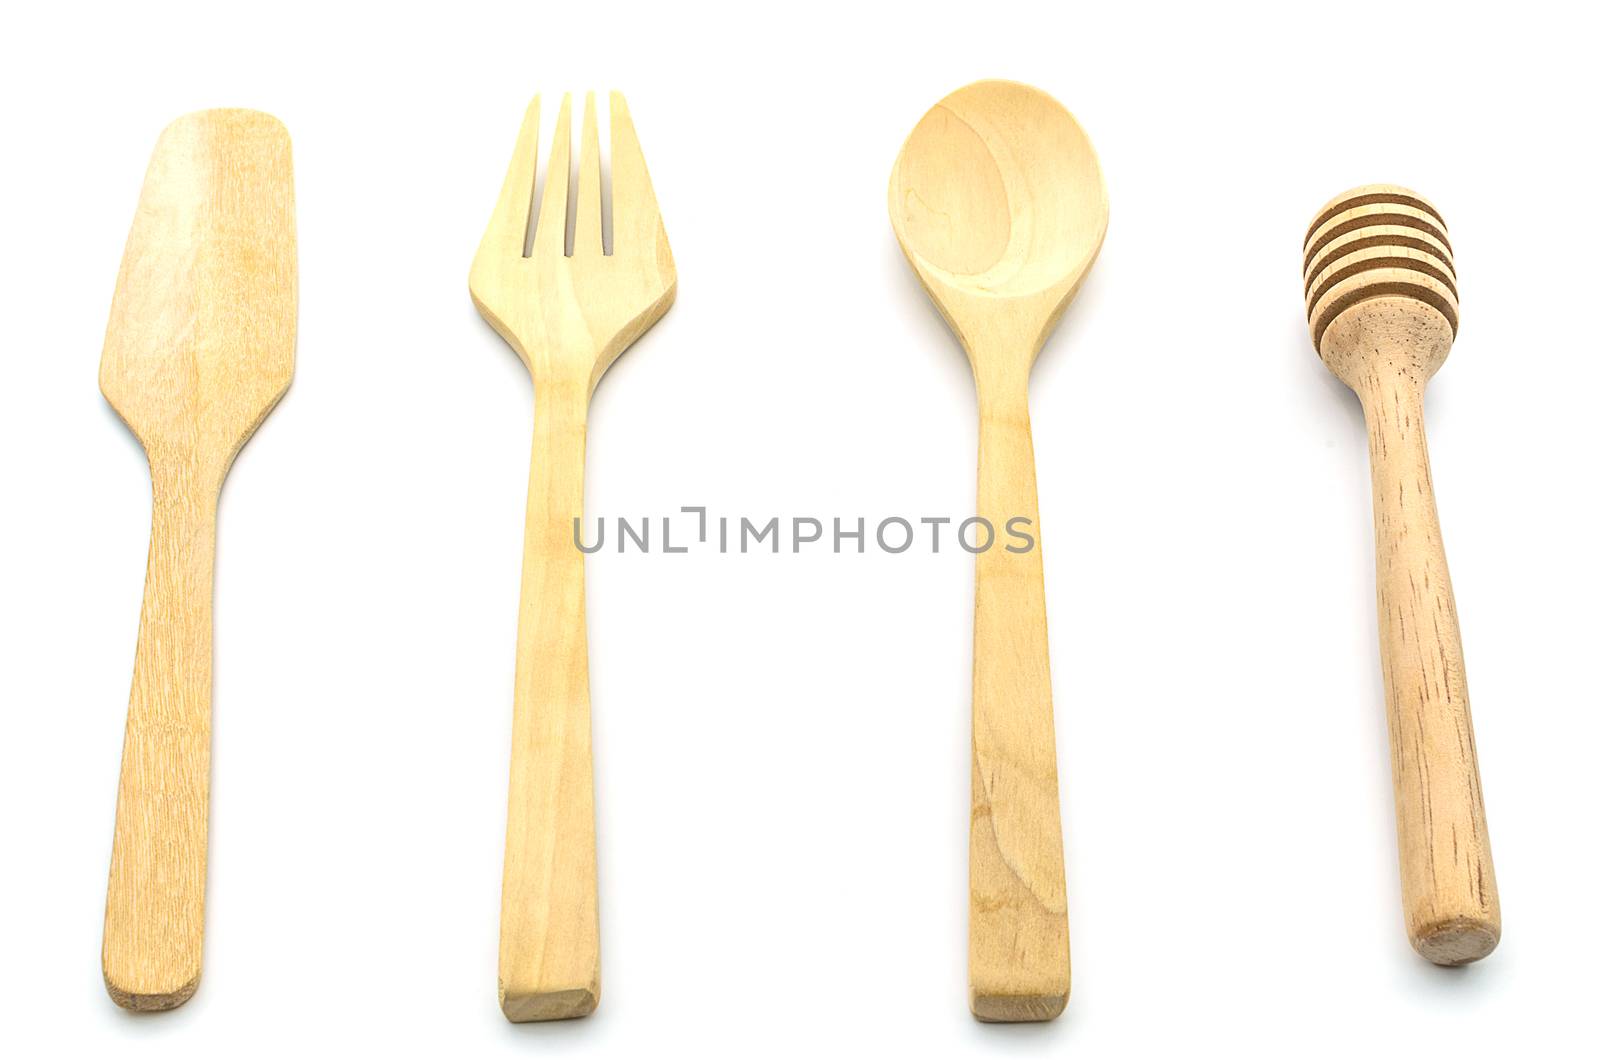 The Kitchen Wood Equipment on white isolated.